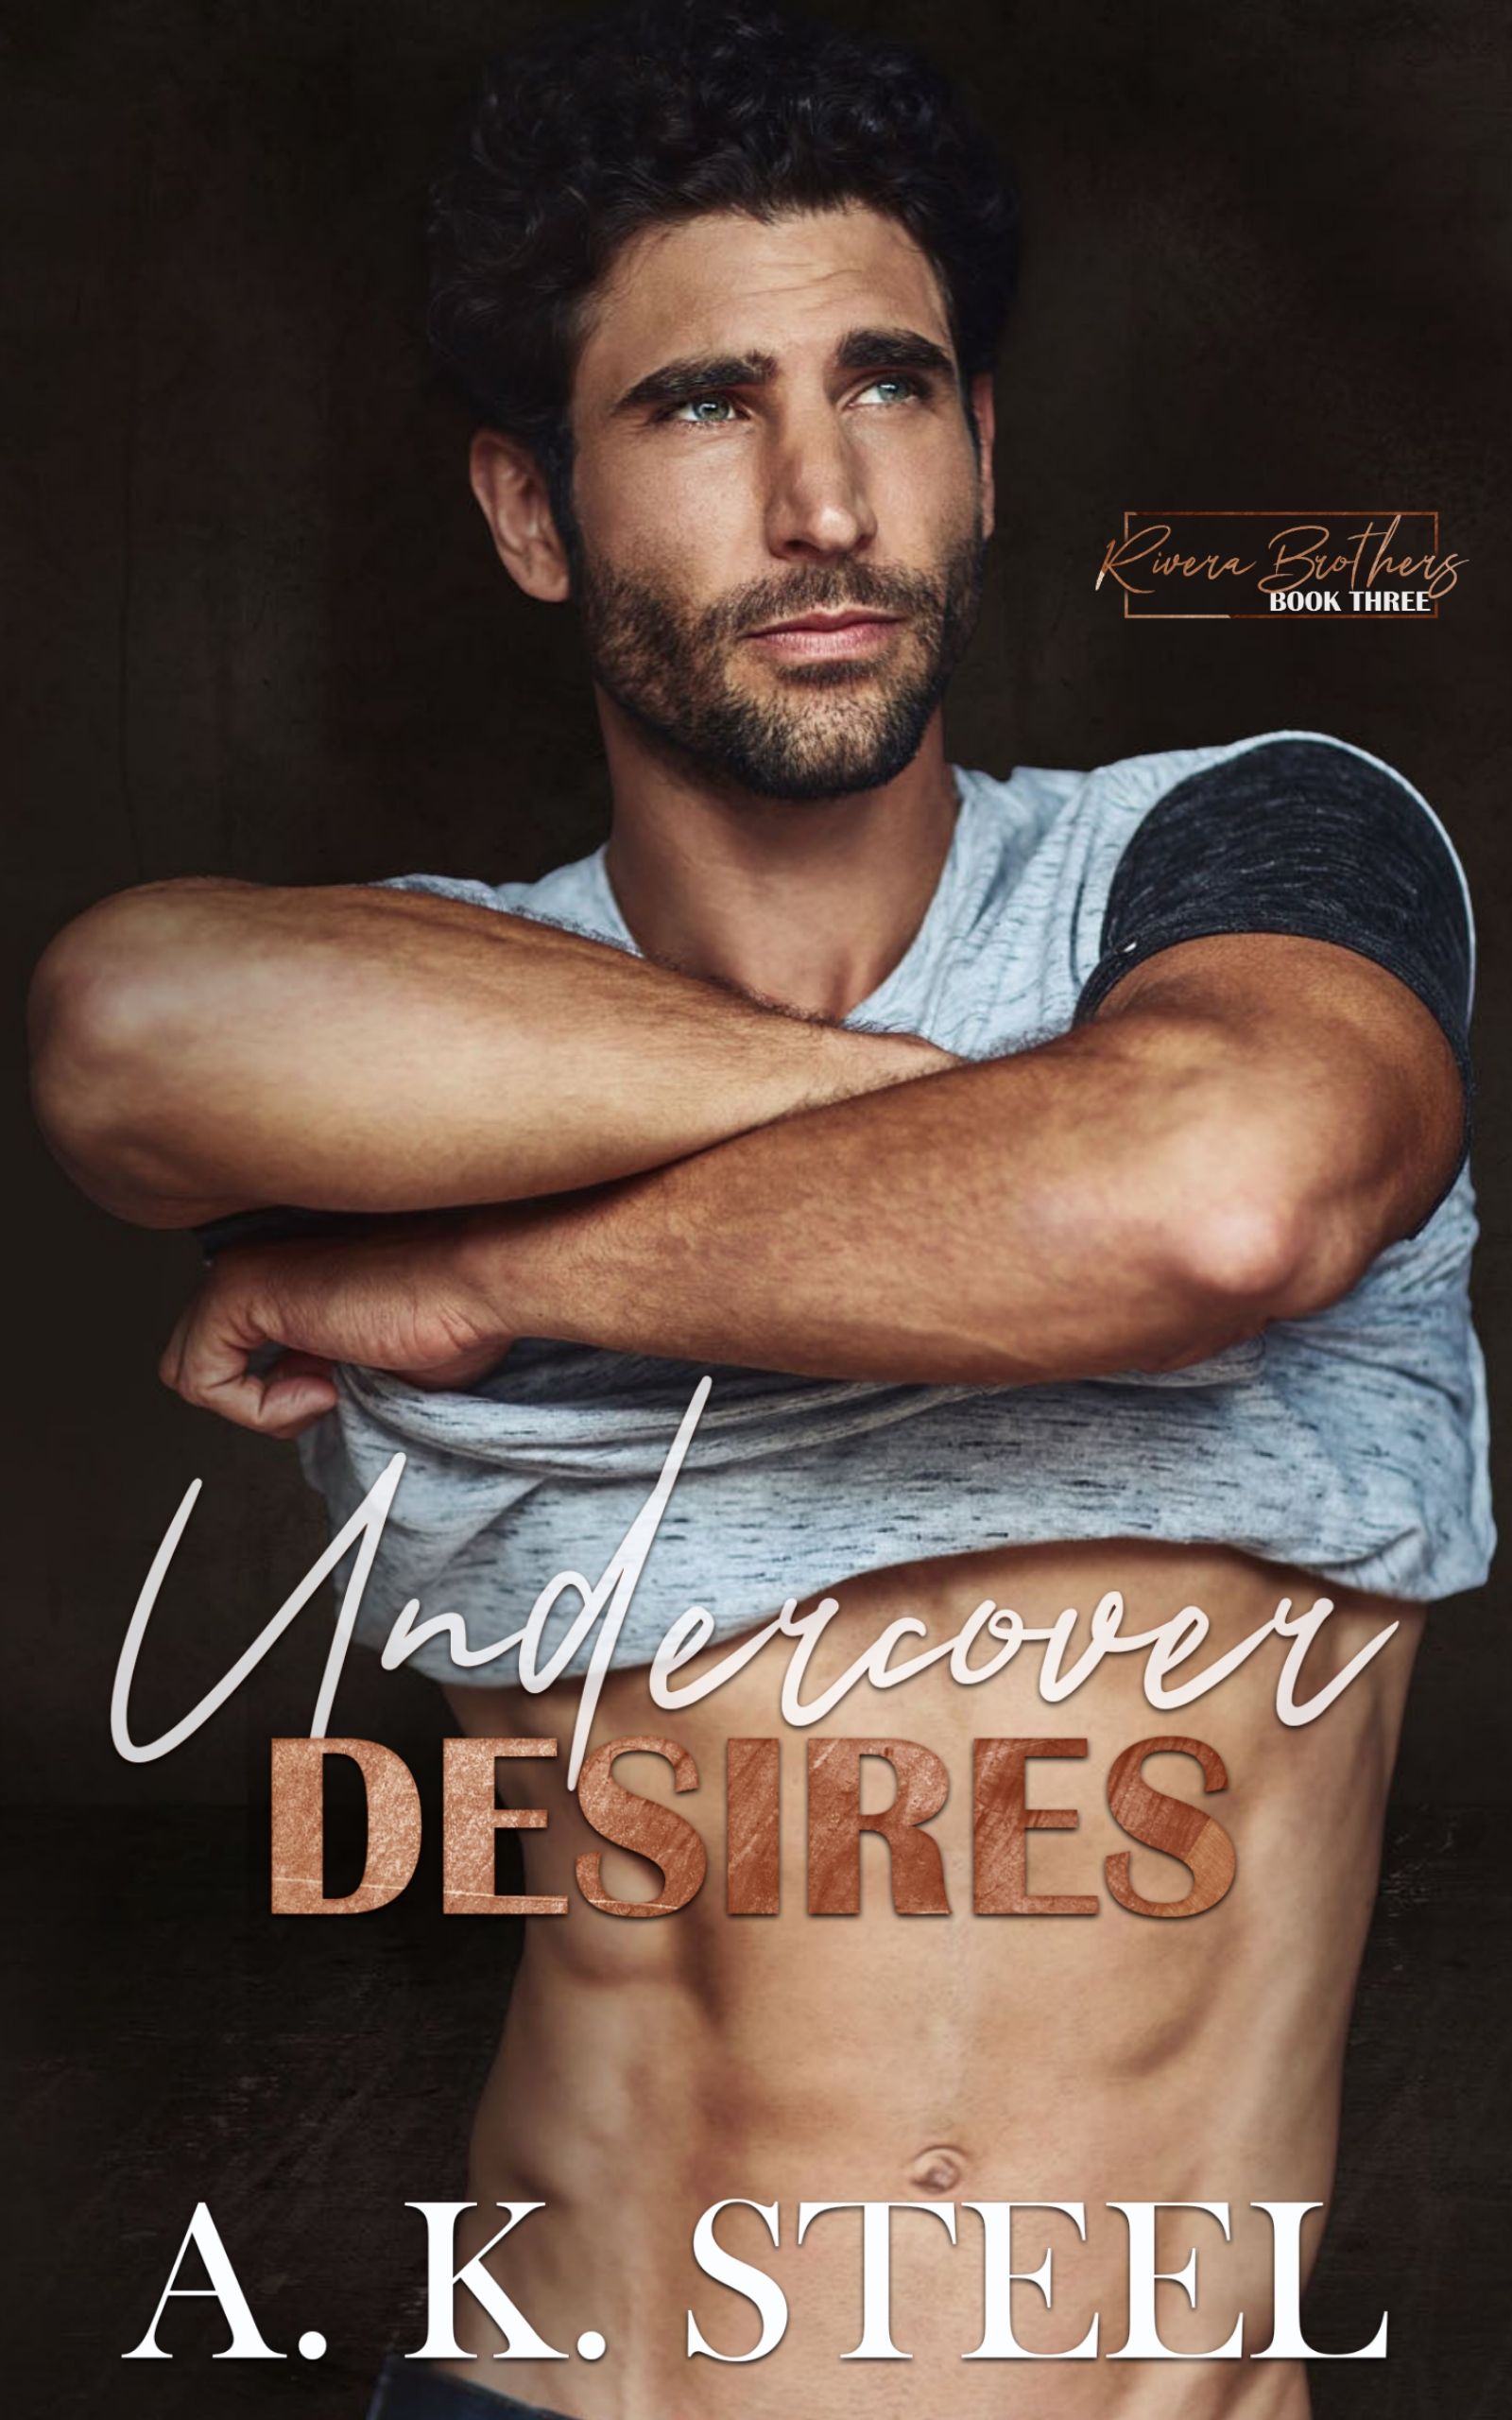 a shirtless man is on the cover of undercover desires by a.k. steel